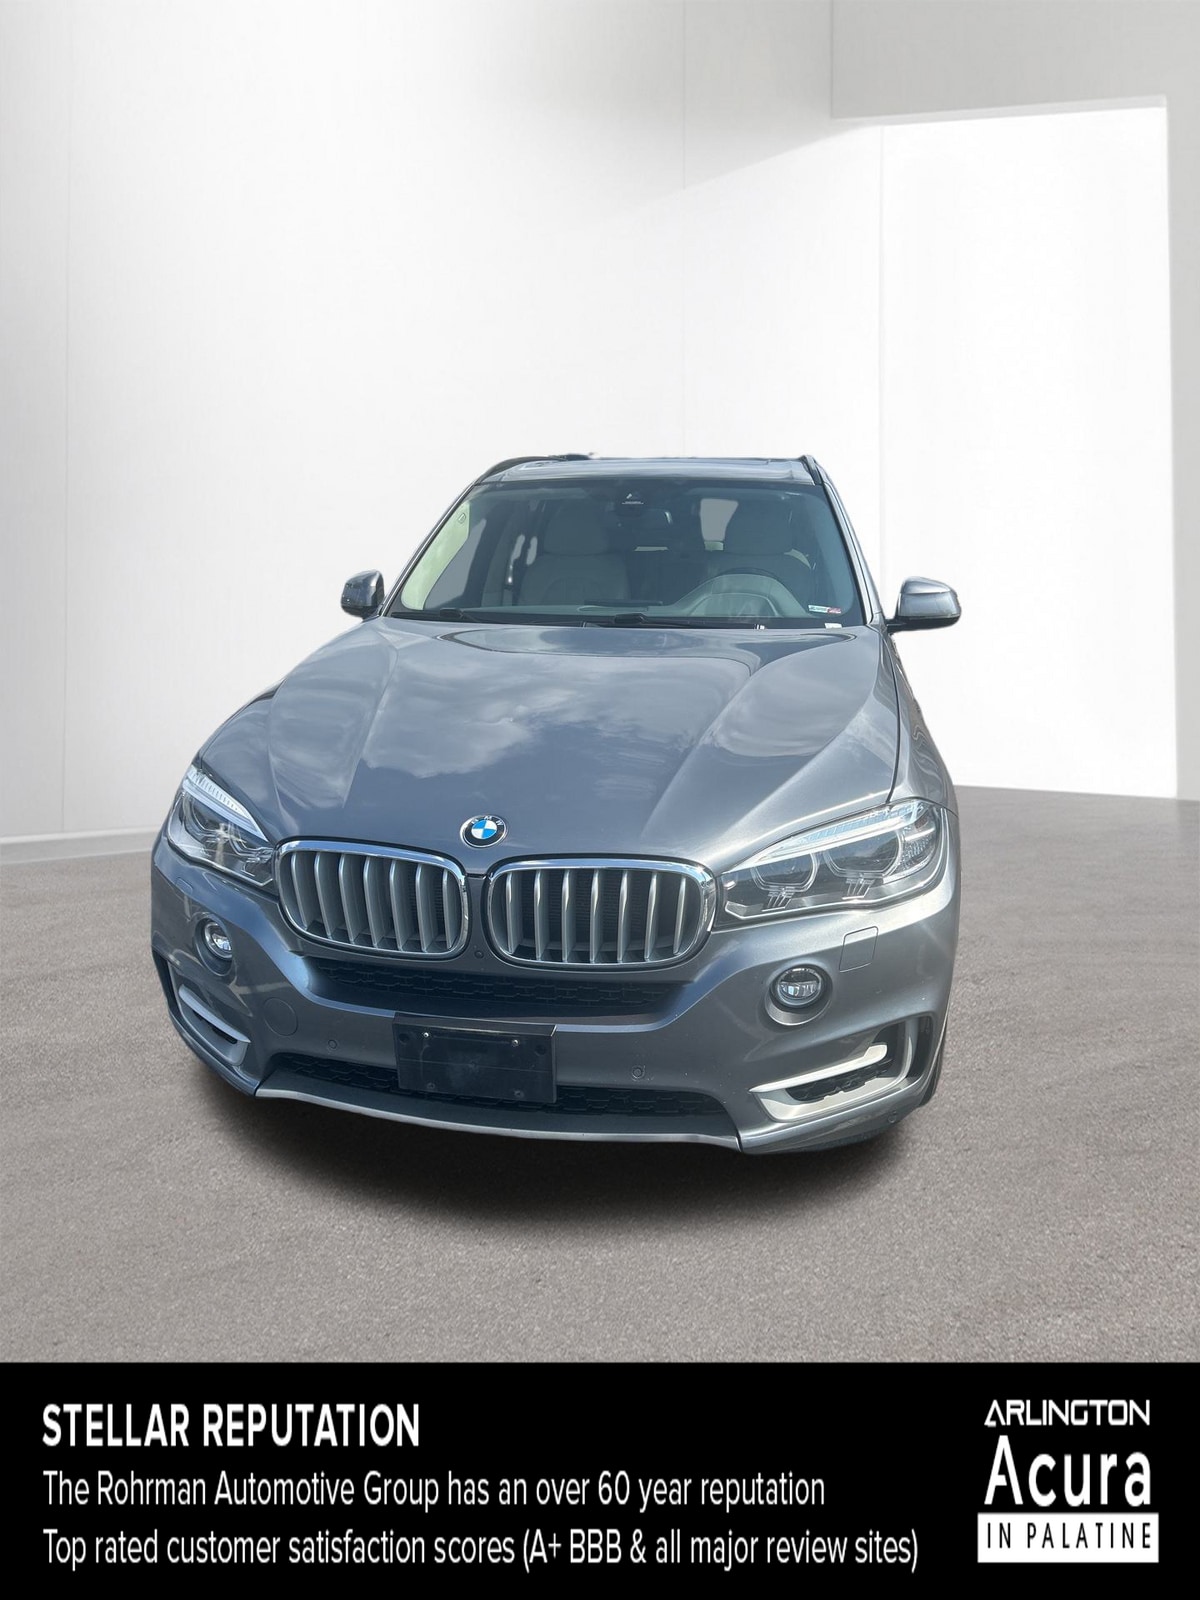 Used 2015 BMW X5 xDrive50i with VIN 5UXKR6C58F0J74320 for sale in Palatine, IL